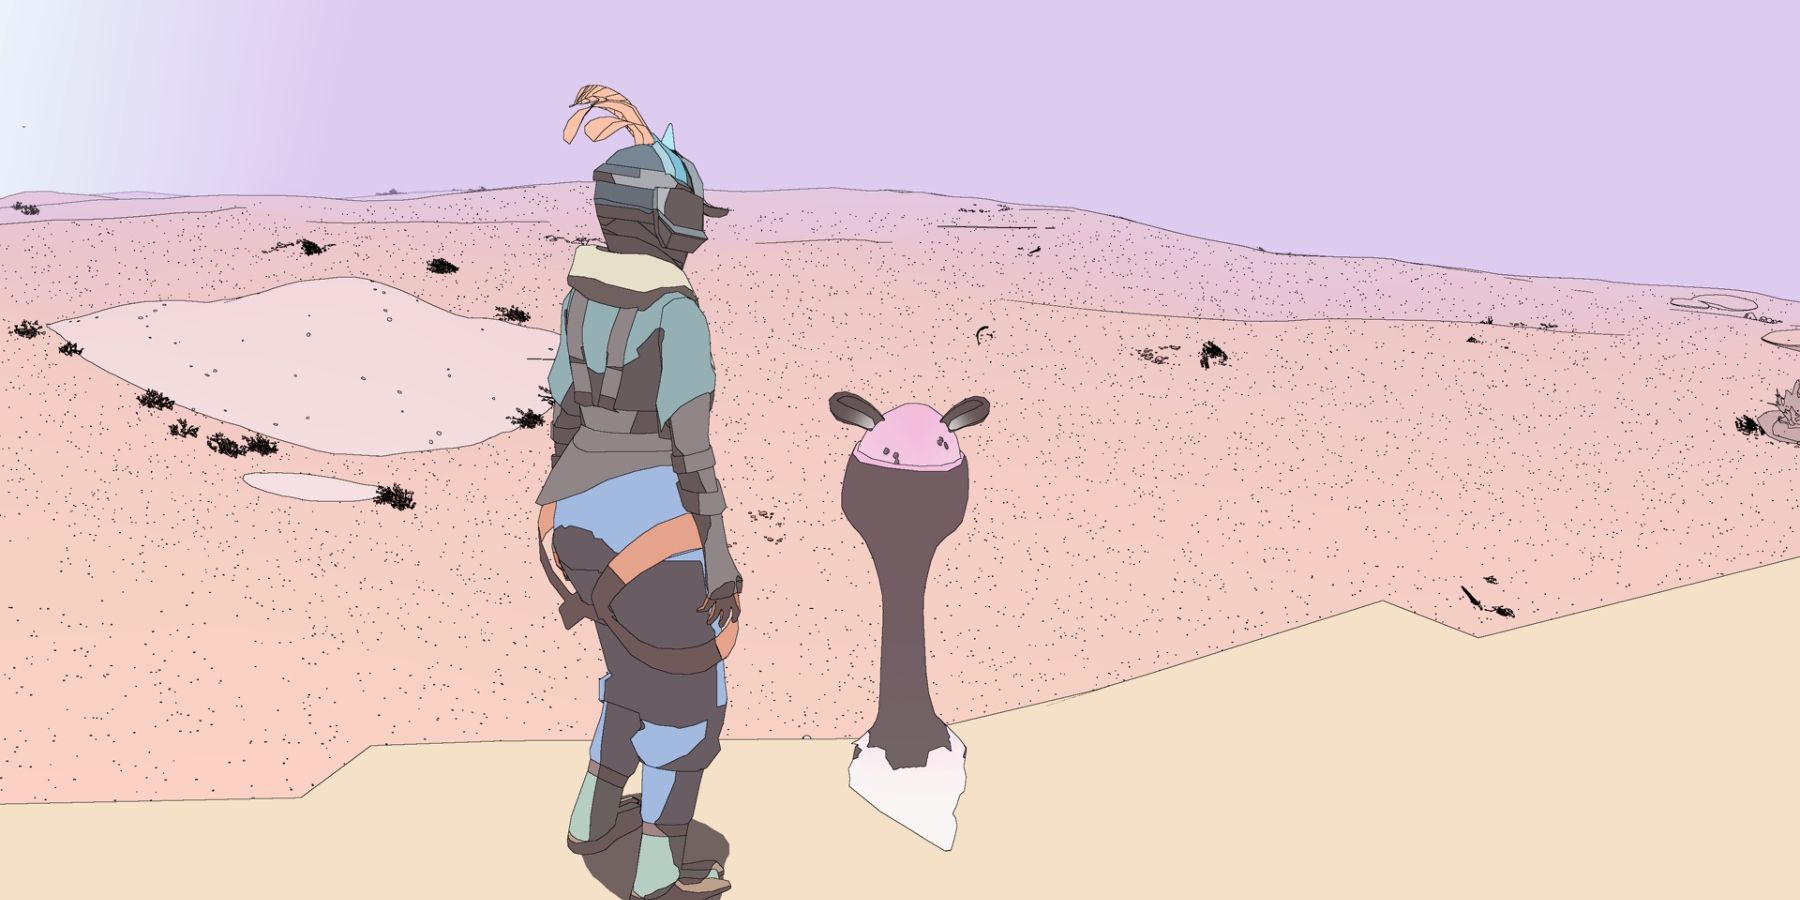 Sable collecting a white, speckled Chum Egg overlooking a desert